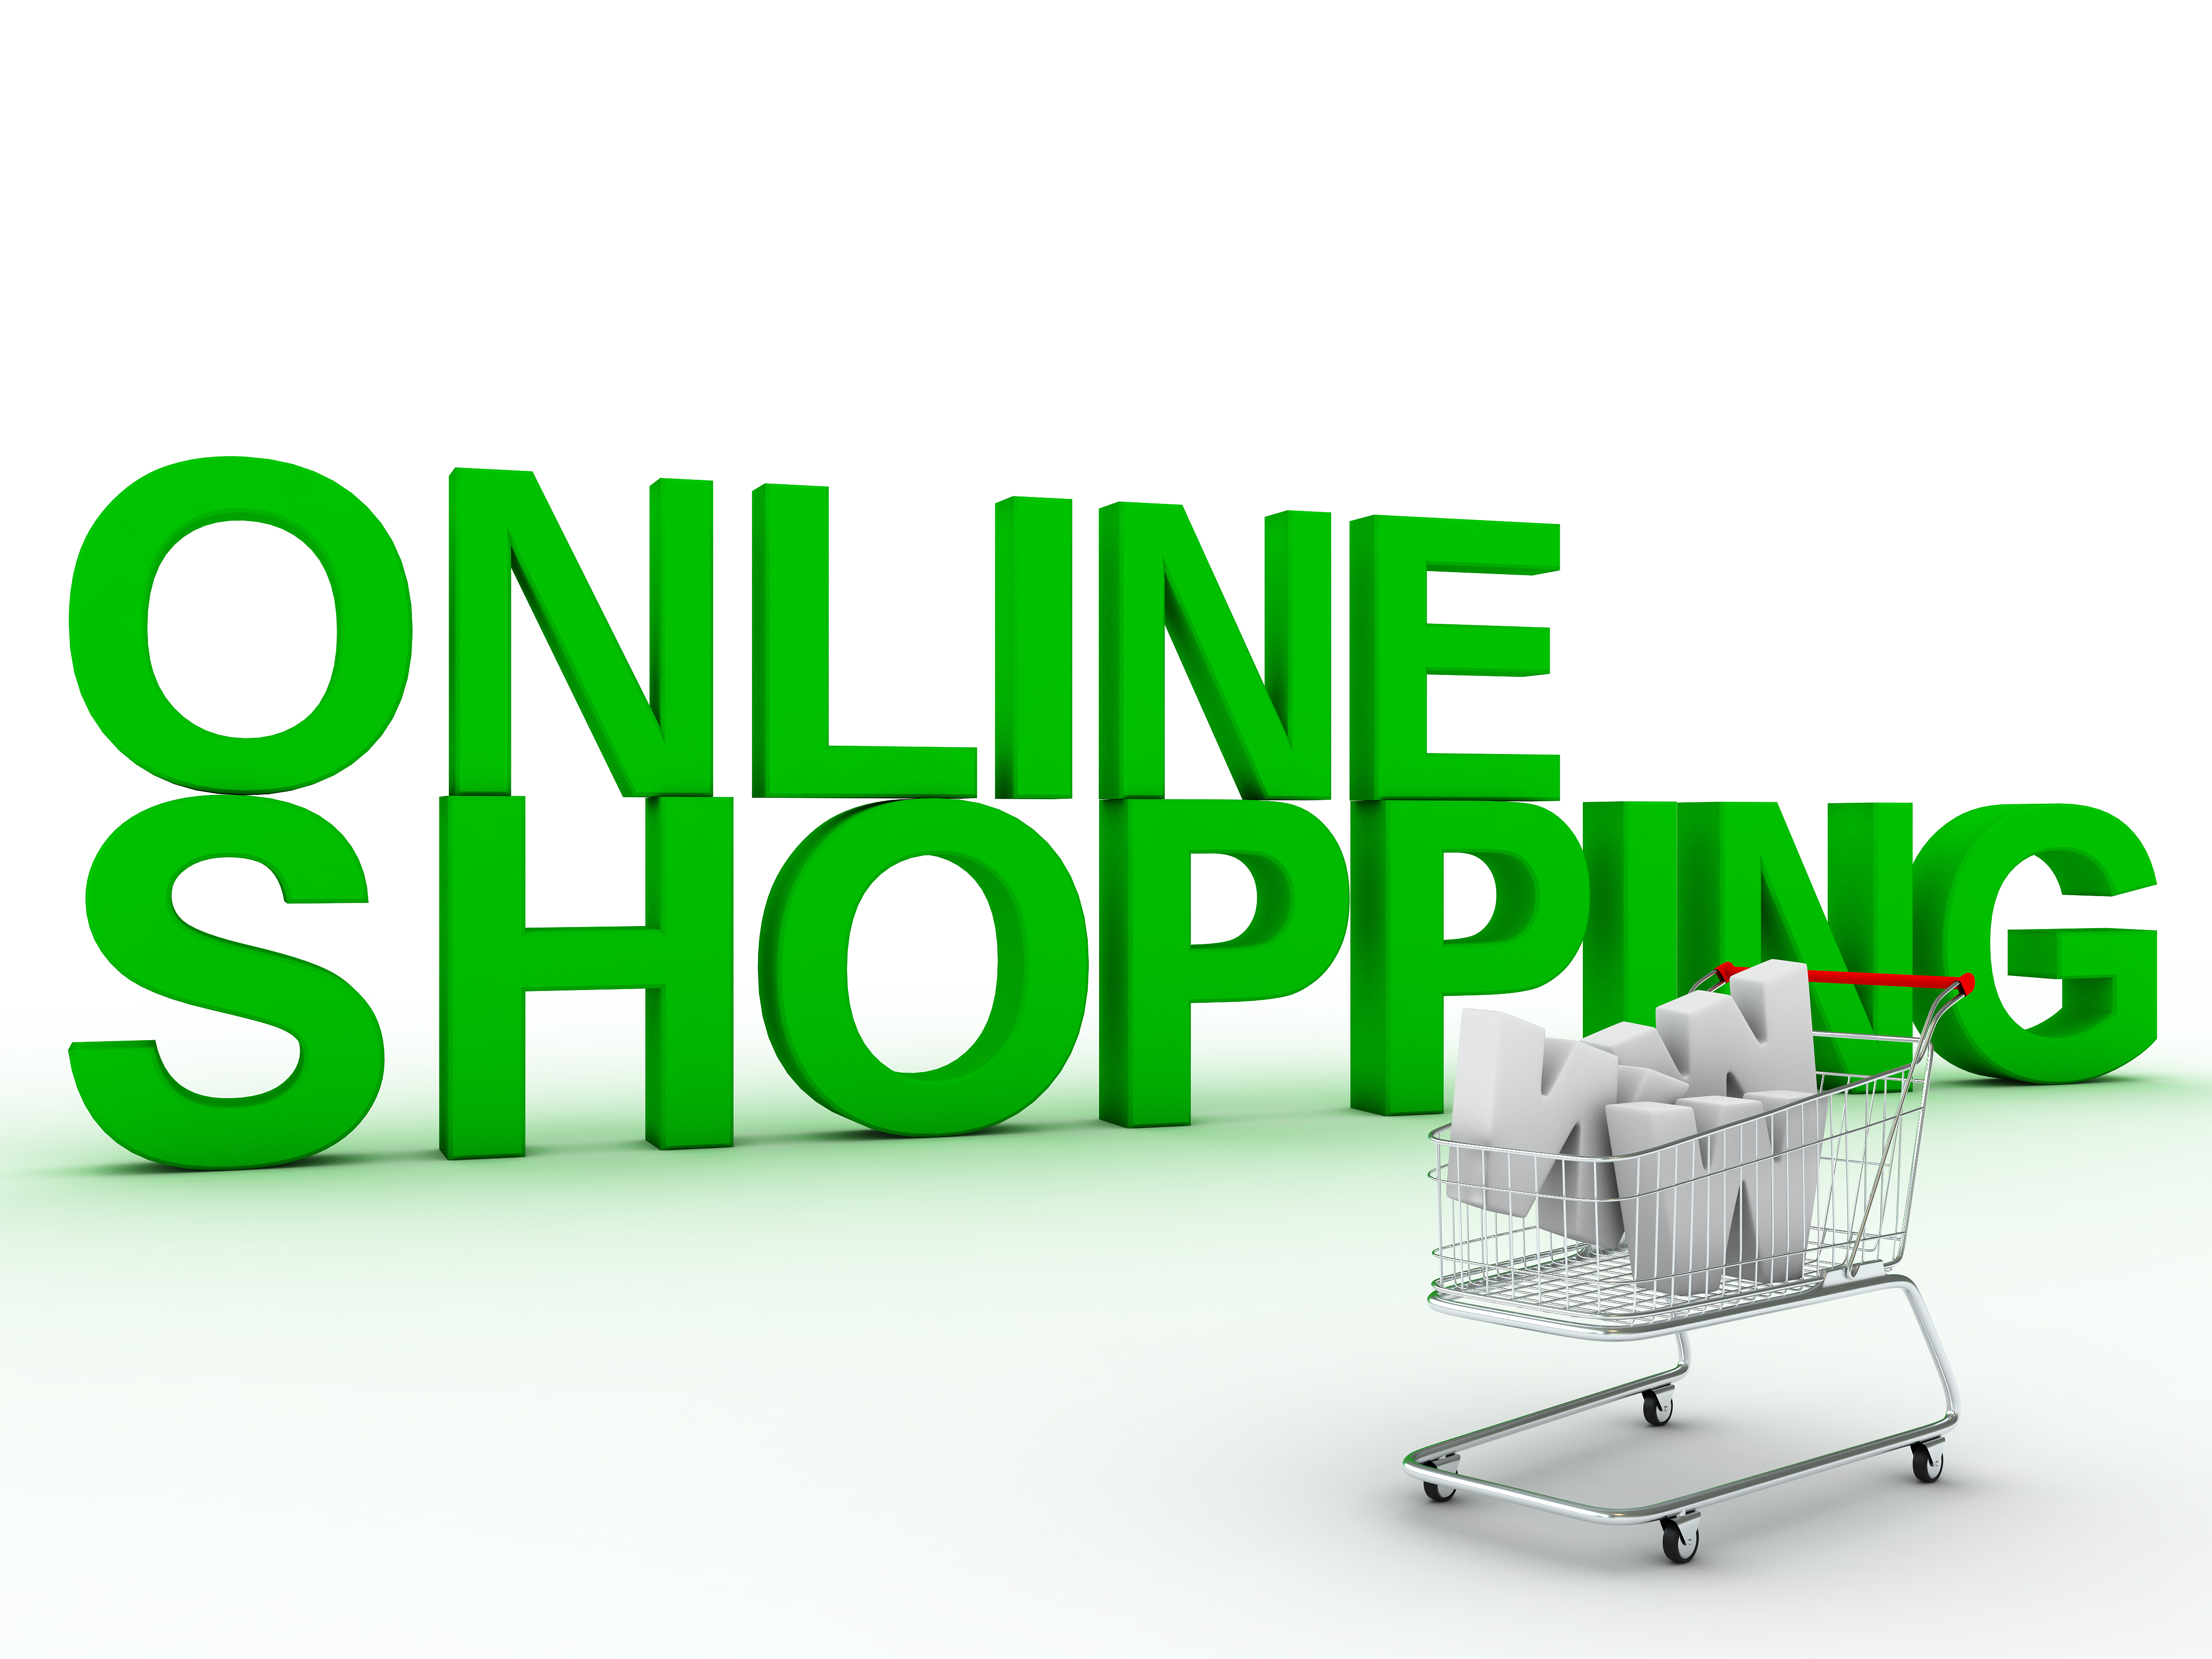 Online Shopping today is one of the many activities carried out today on the internet because it has made people's lives easier. However there are number of risks involed. Image Credit: Goodsph